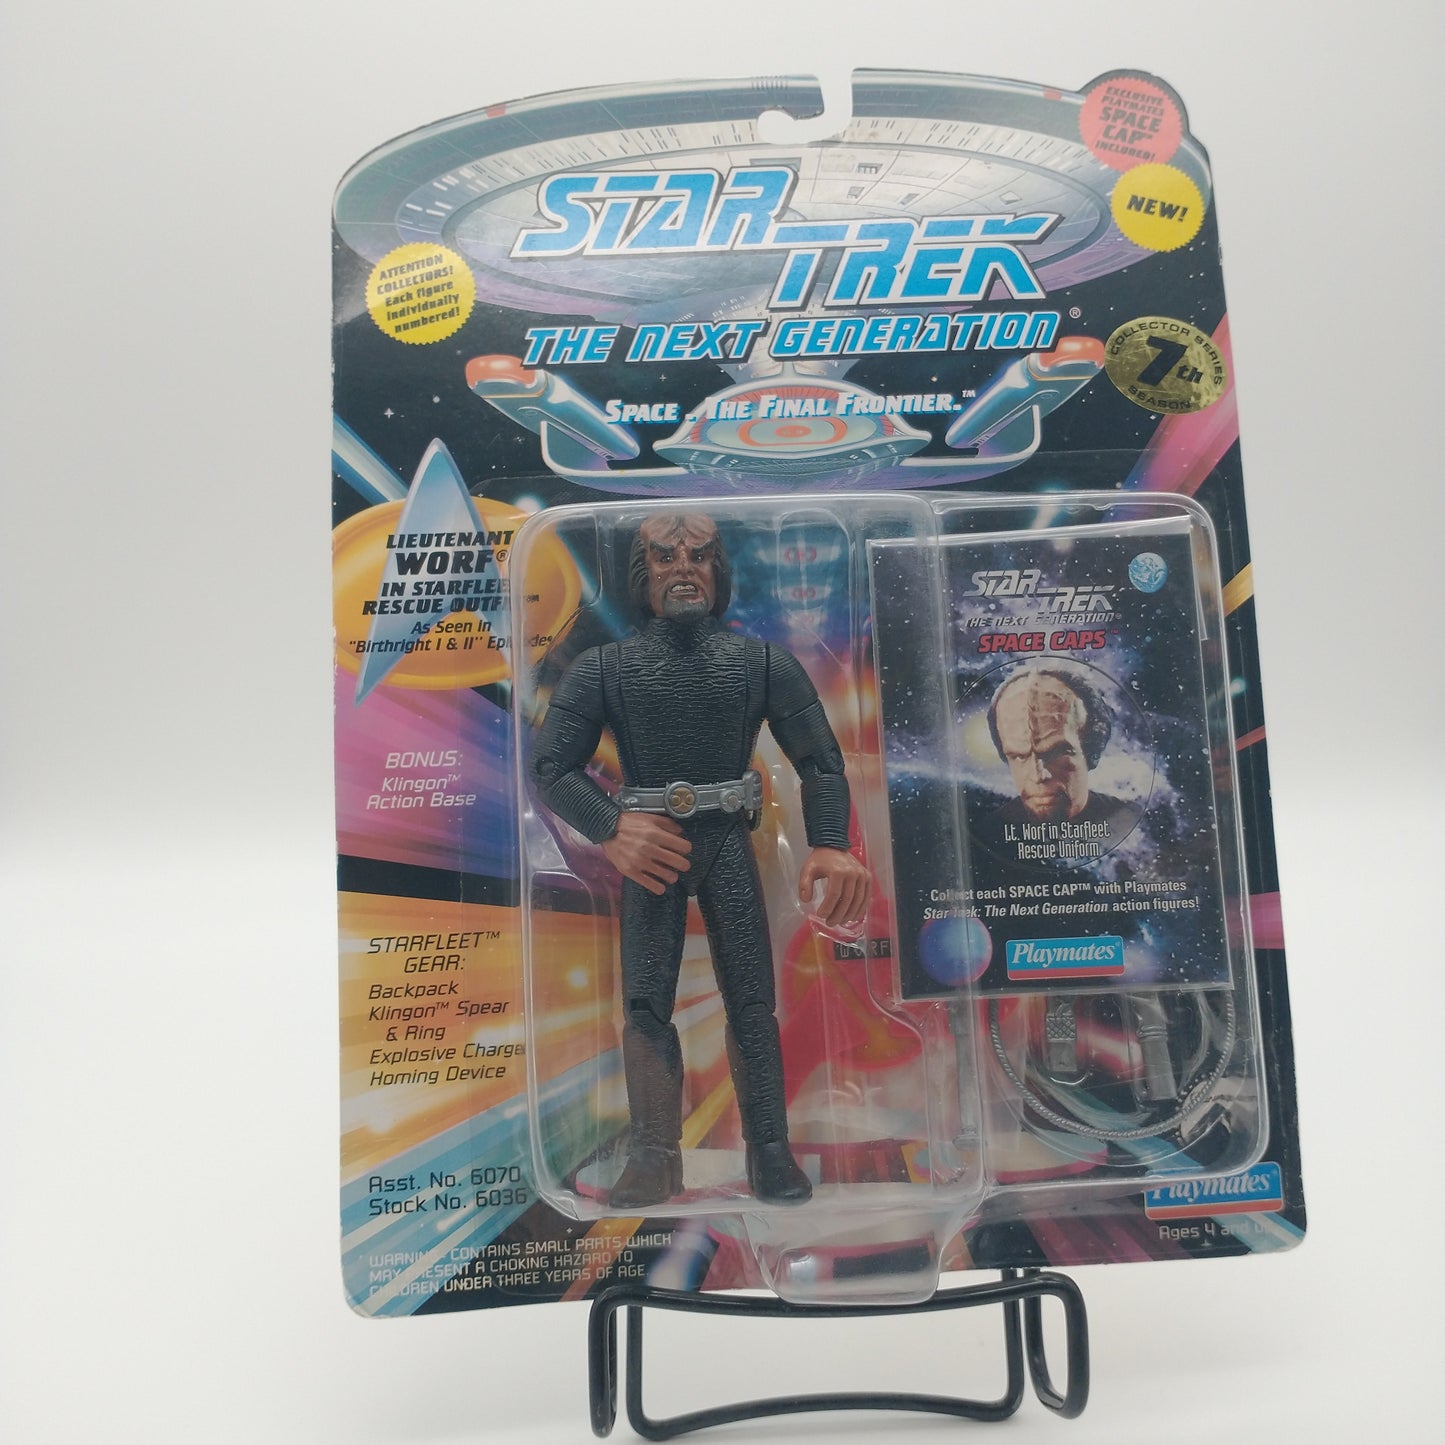 The front of the box and bubble. The bubble is sealed, the action figure inside has dark skin and is wearing a black jumpsuit with a silver belt. Next to him is a collectible card featuring a picture of the character worf